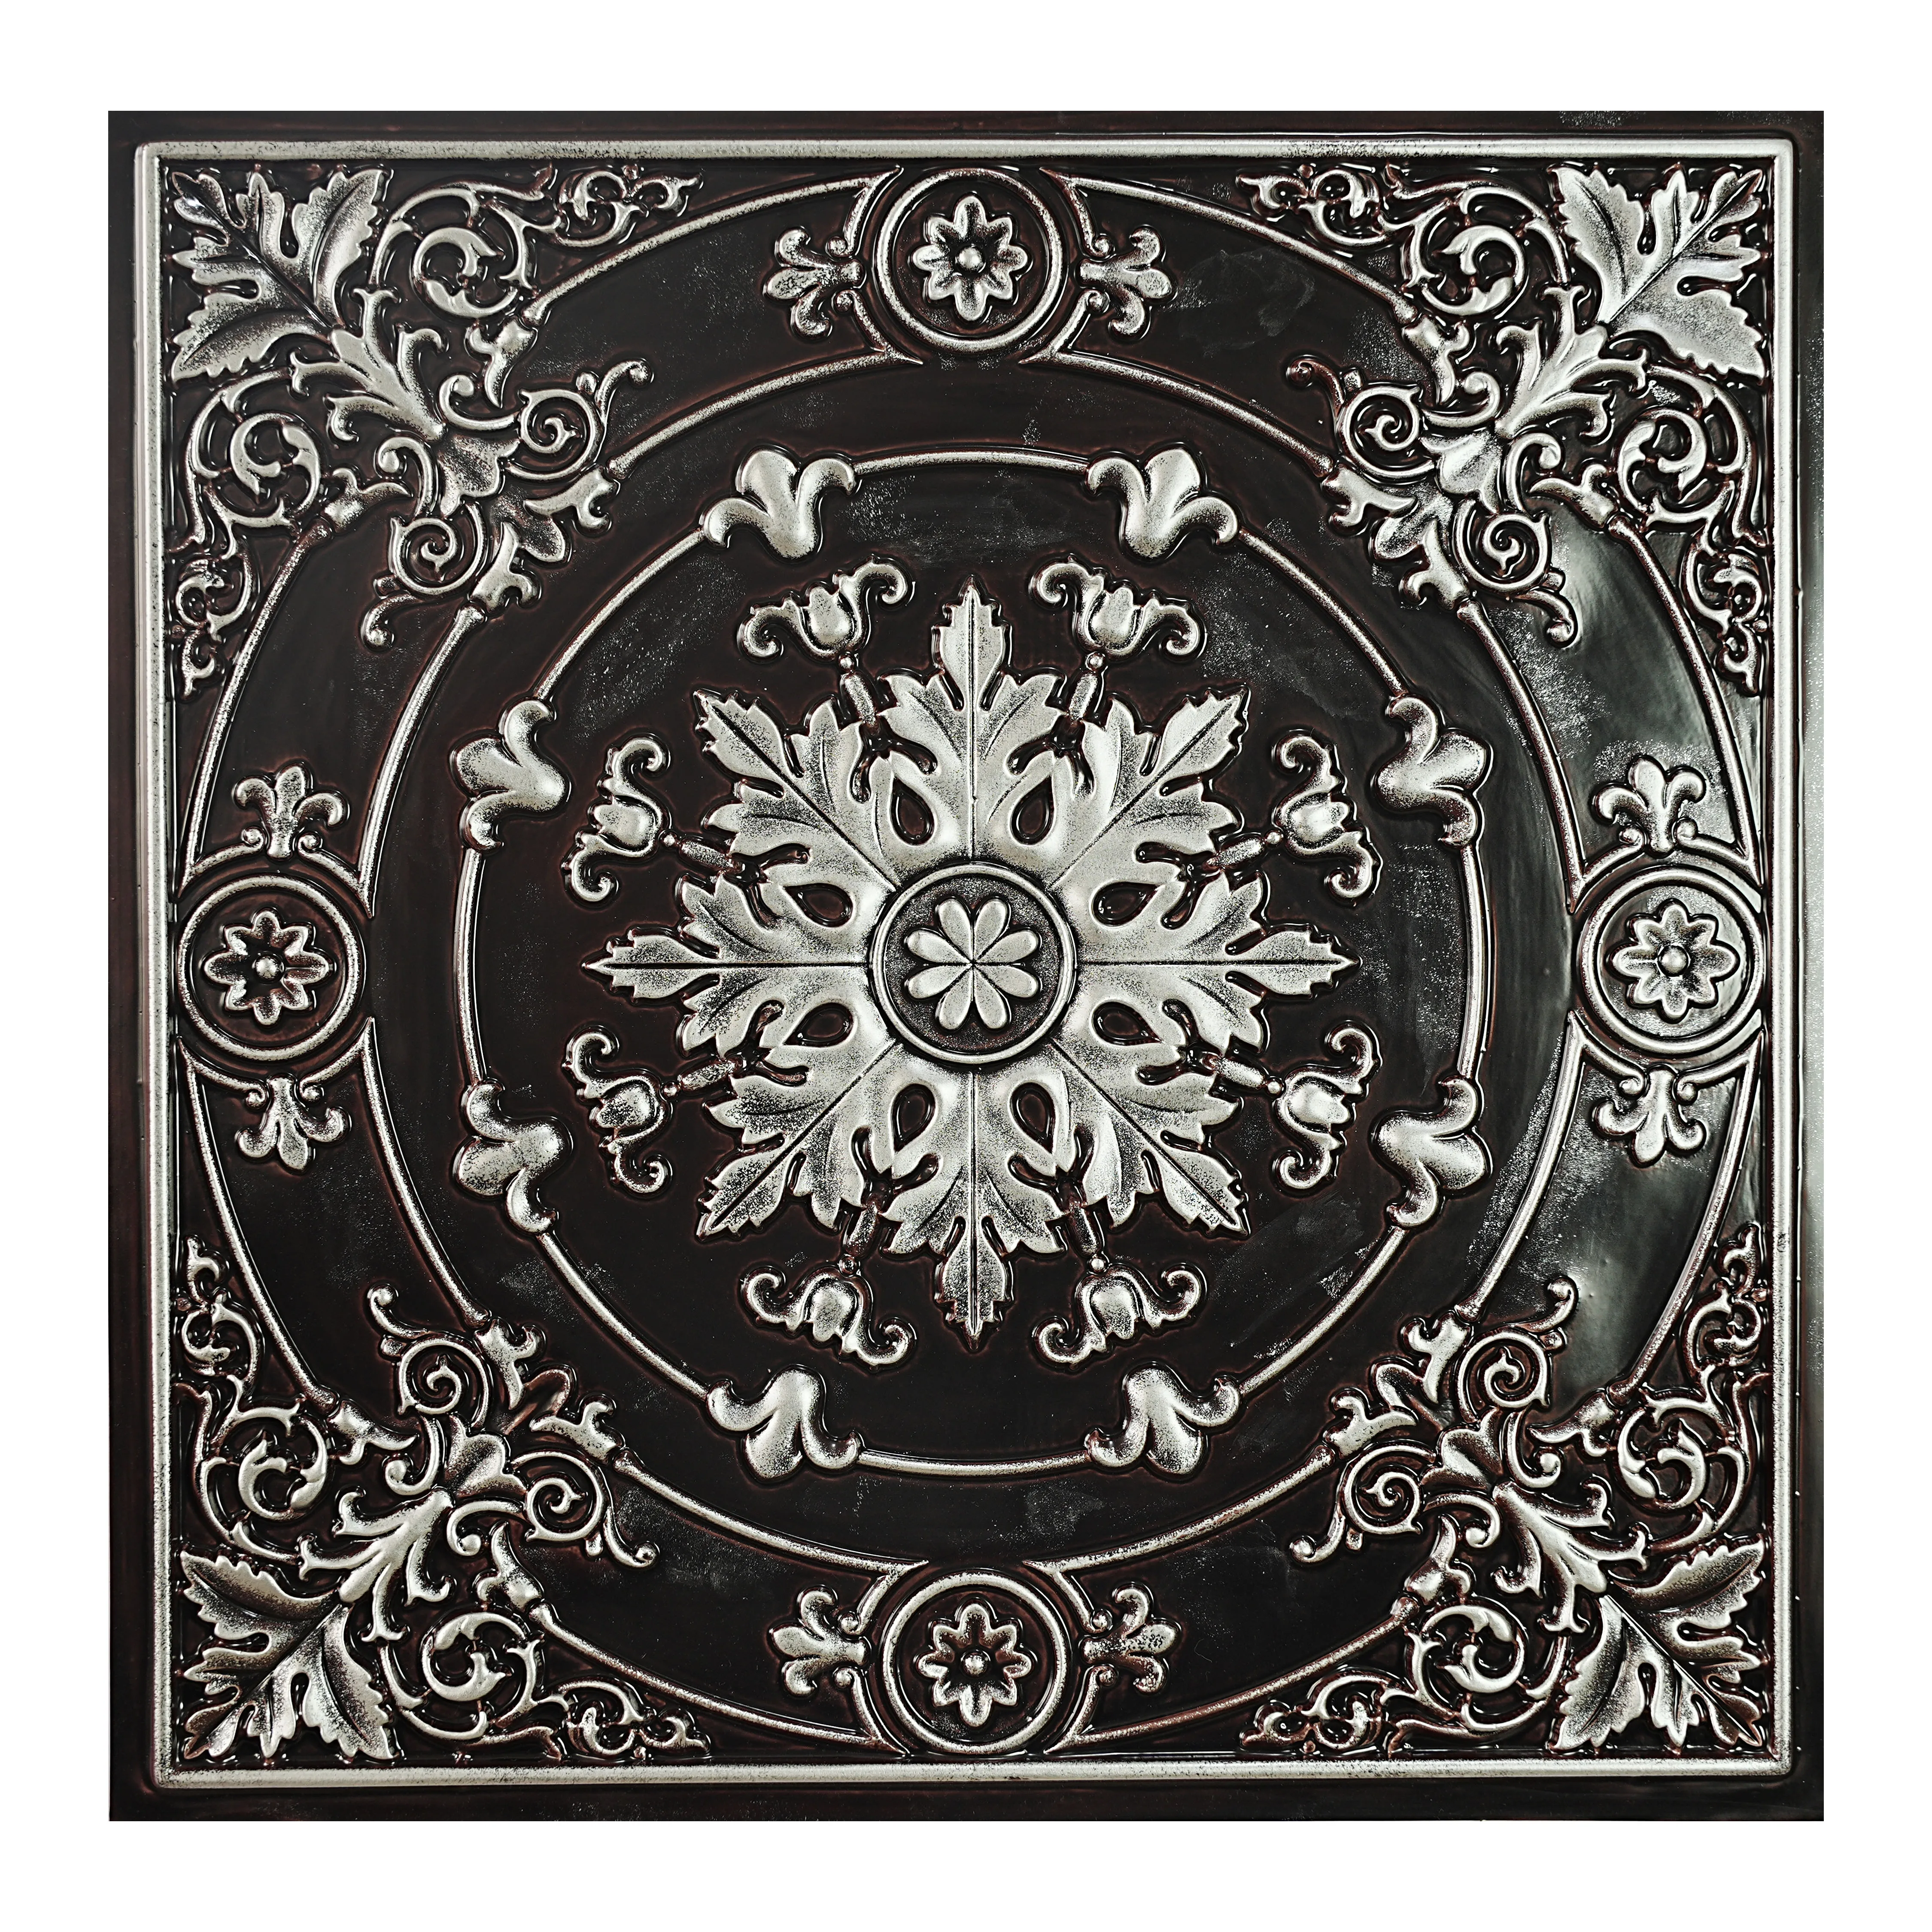 3D Embossed Wall Panel PVC Faux Tin Painting Tile Interior Decorative Board for Cafe Club PL18 Traditional Silver PAINTSDECOR